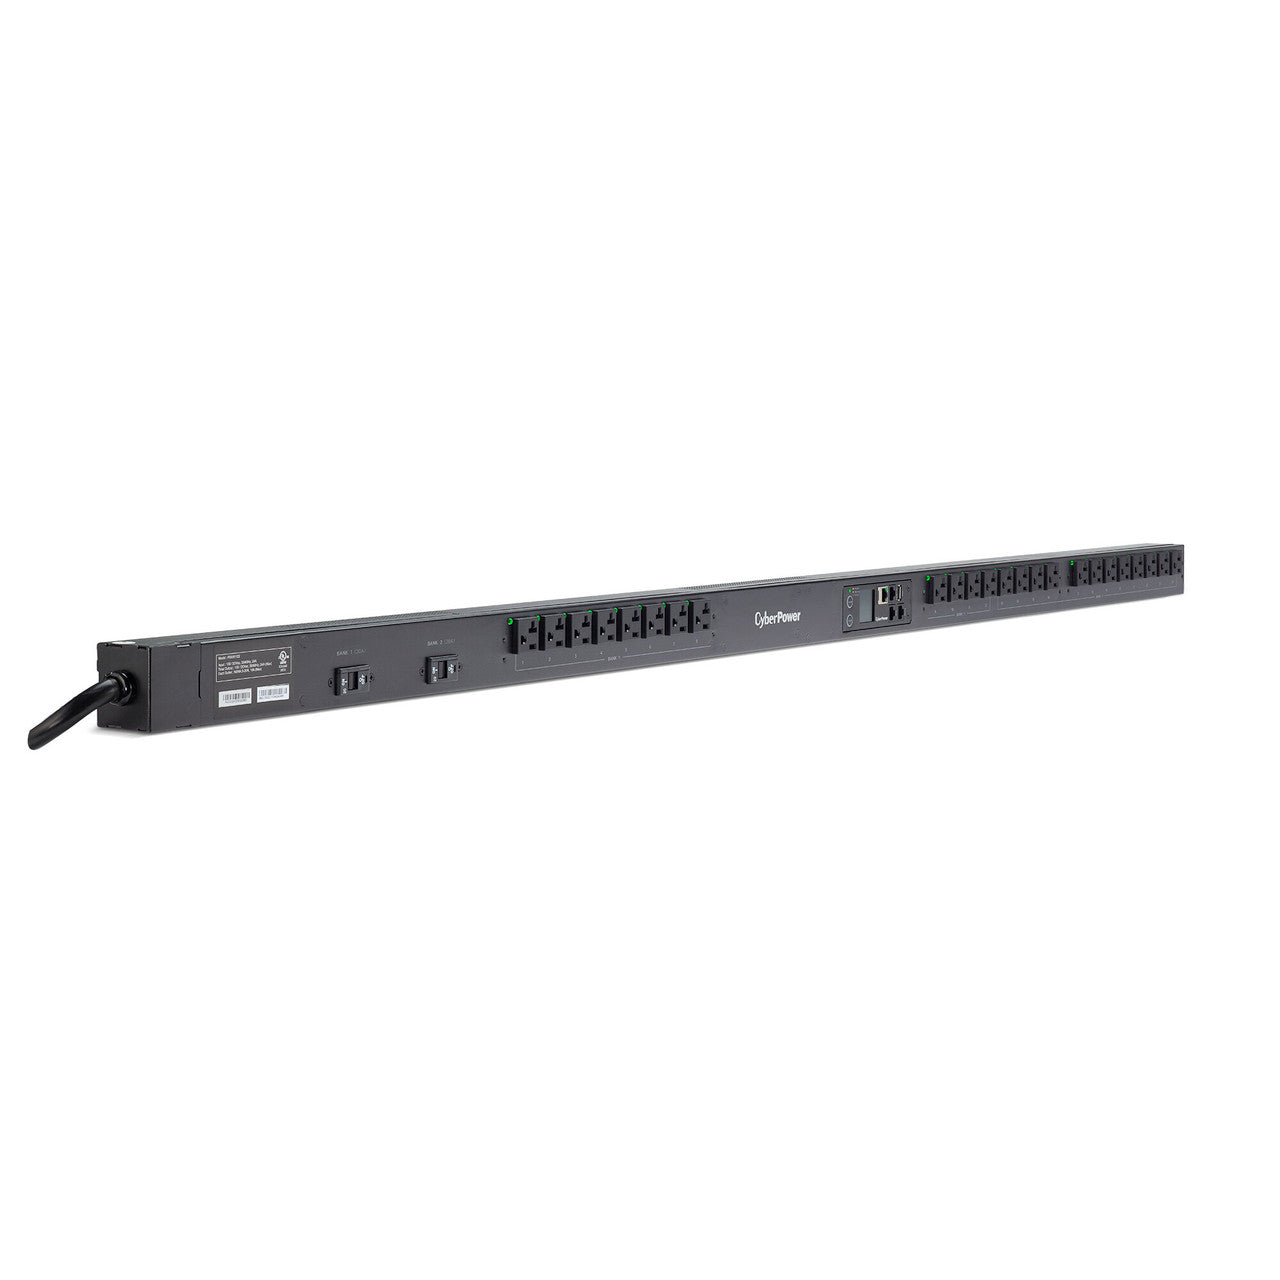 CyberPower PDU81102 Metered-by-Outlet Switched PDU 30A 120V L5-30P Input (24) NEMA 5-20R Output 10ft Cord 0U 3yr Wty